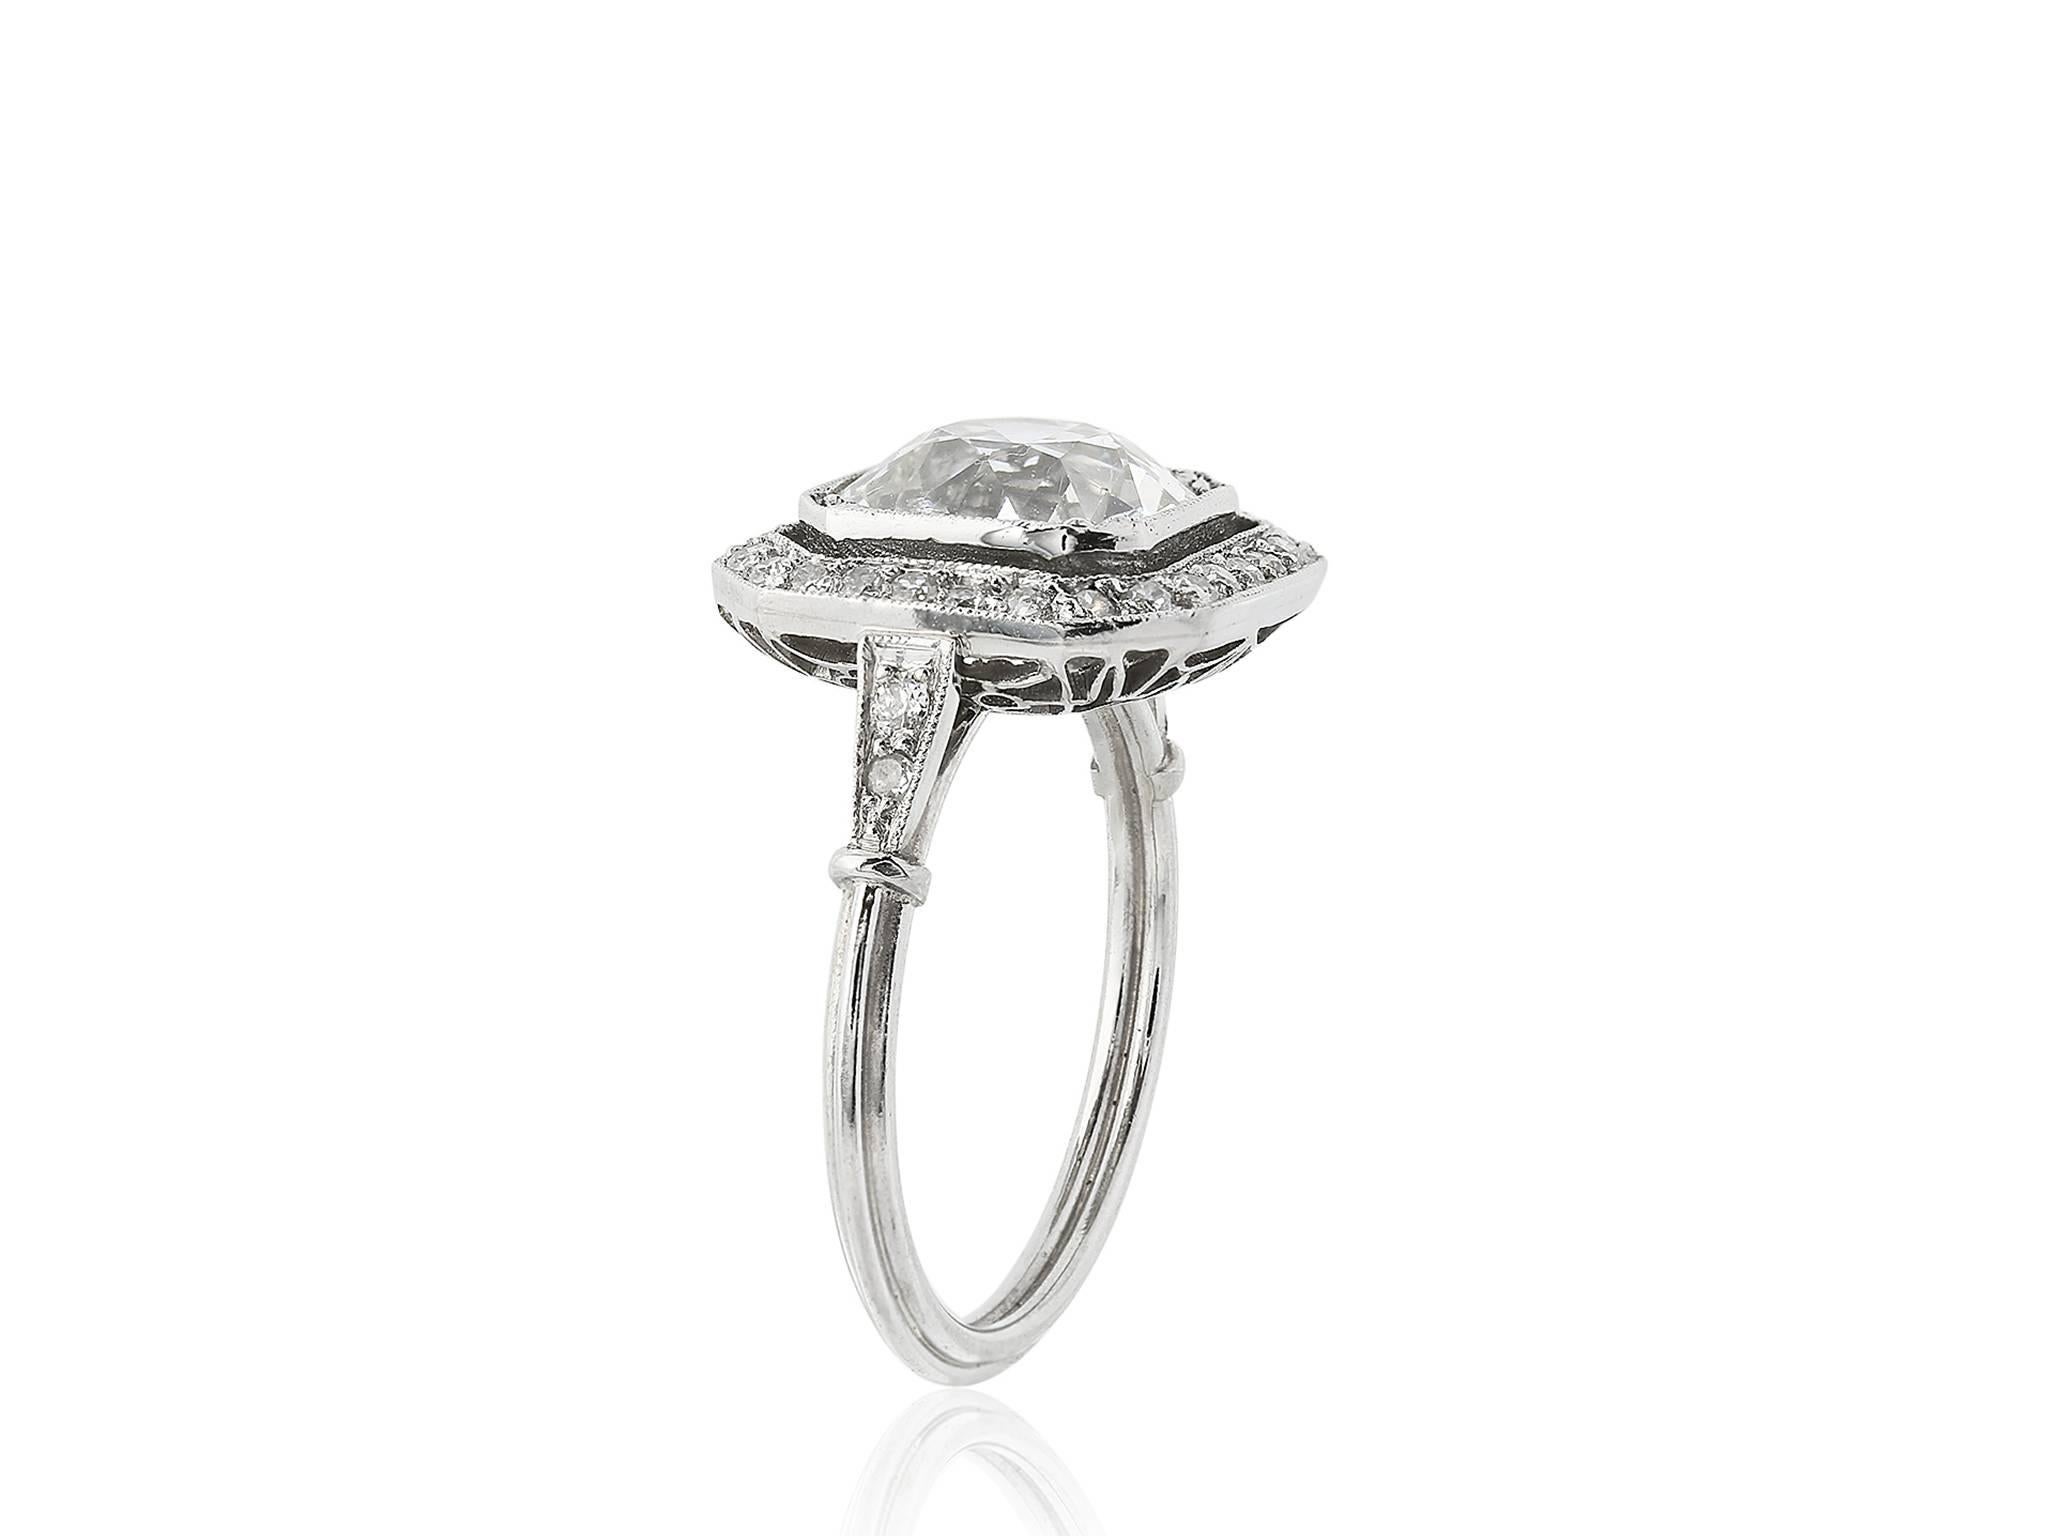 Platinum vintage style ring consisting of 1 Old European cut diamond weighing approximately 3.10 carats having a color and clarity of I/SI1 respectively, set with Old European cut diamonds surrounding the center stone and going down the shoulders